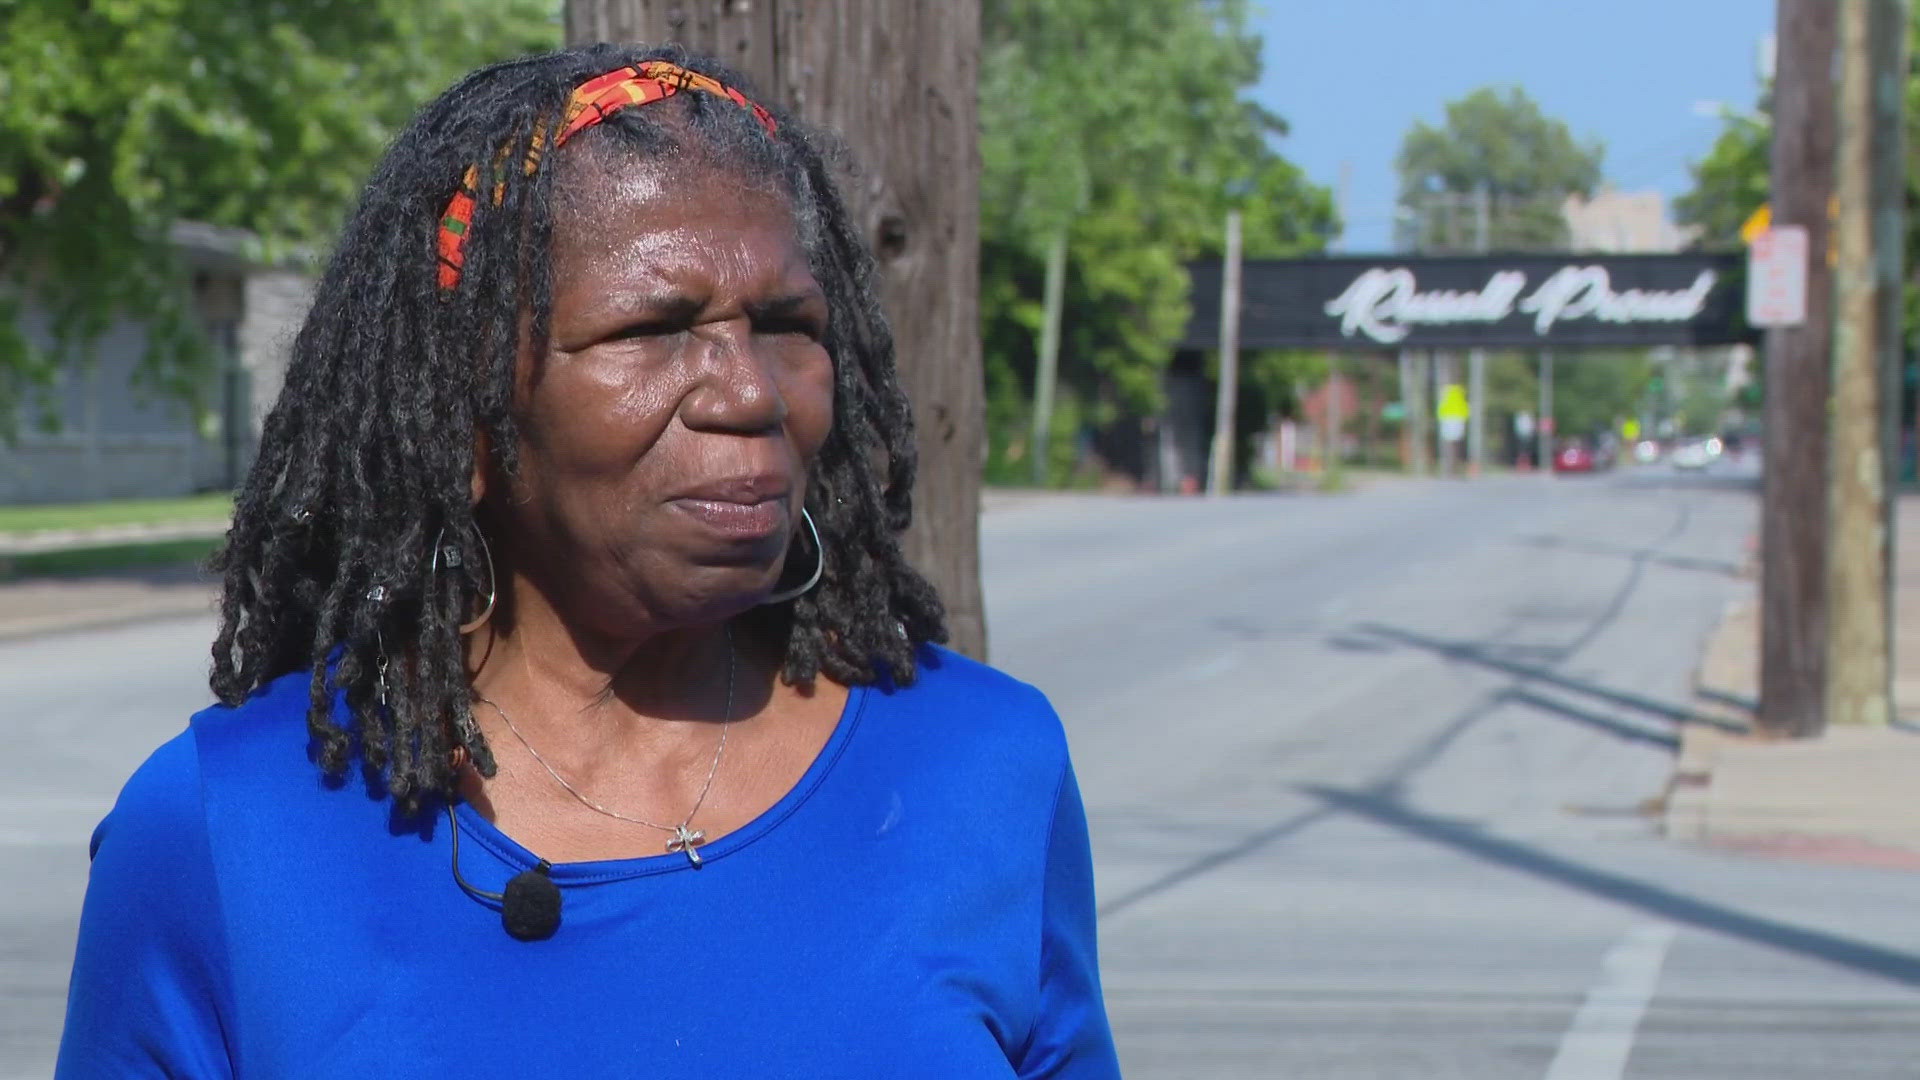 West Louisville resident and community activist Jackie Floyd said she heard the police sirens Tuesday morning.